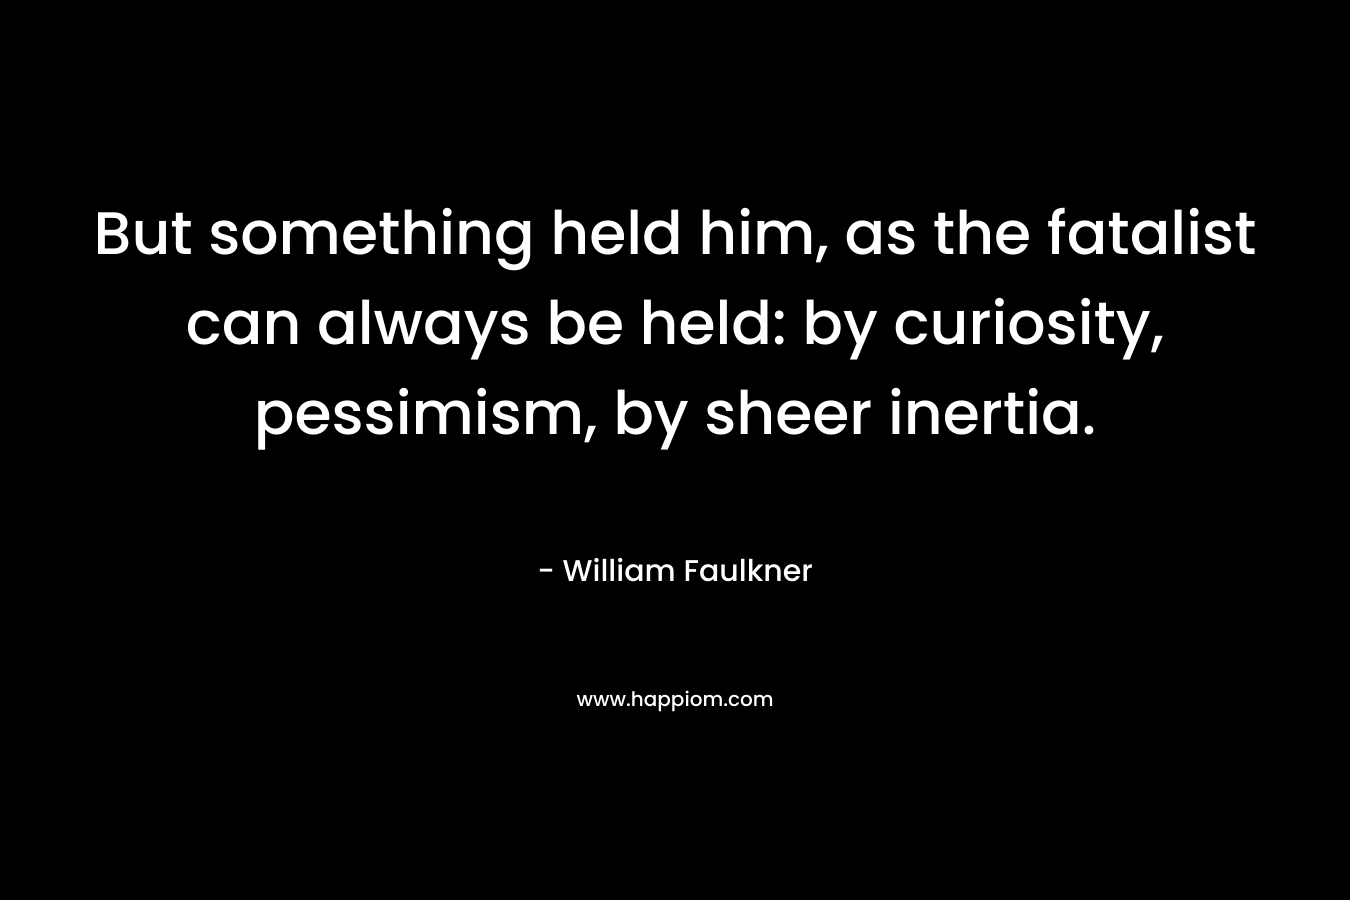 But something held him, as the fatalist can always be held: by curiosity, pessimism, by sheer inertia. – William Faulkner